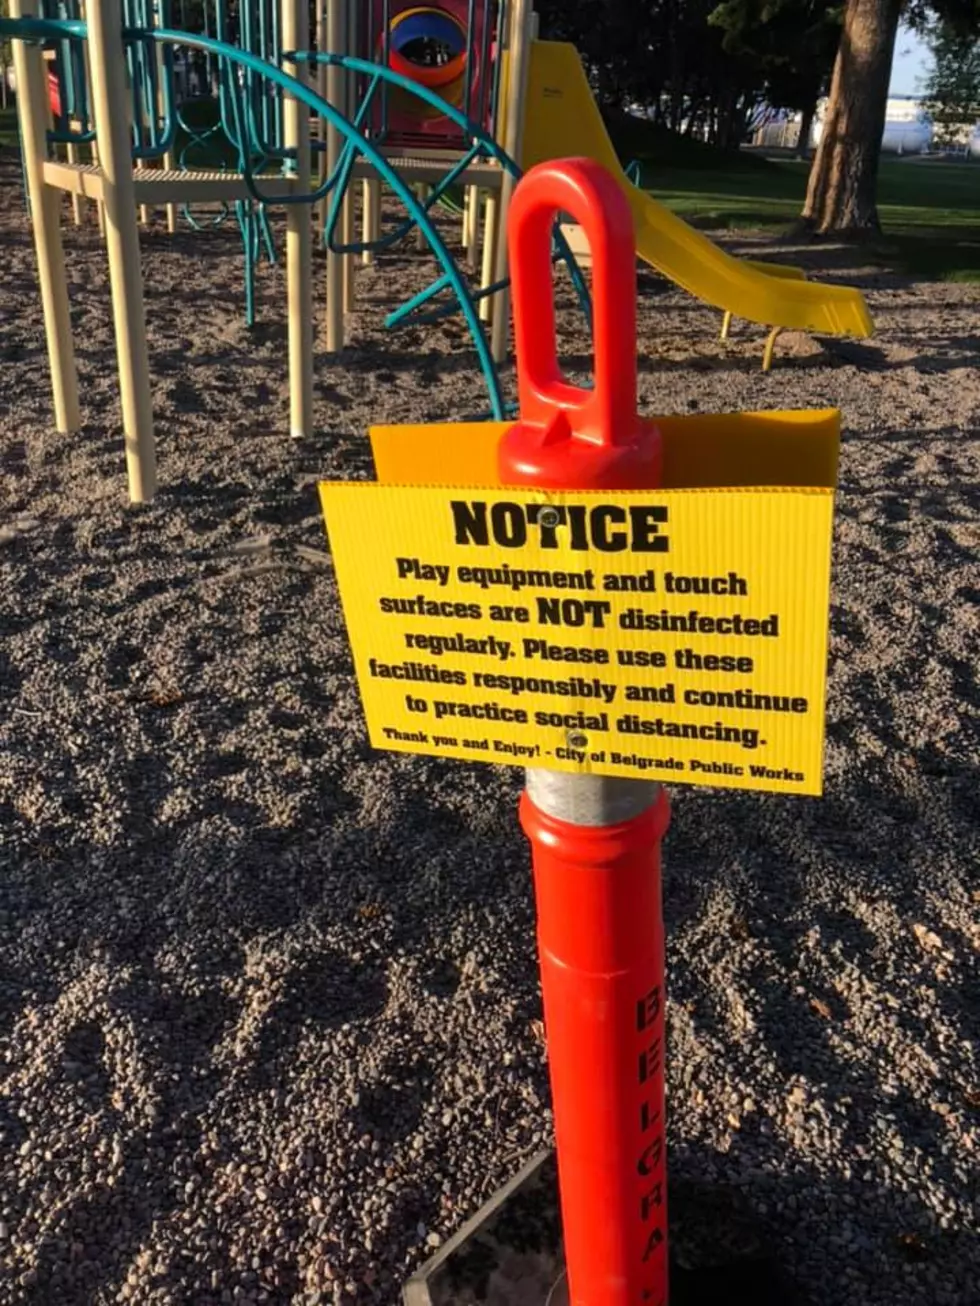 Have You Seen The Signs, Parks And Playgrounds Begin To Open!